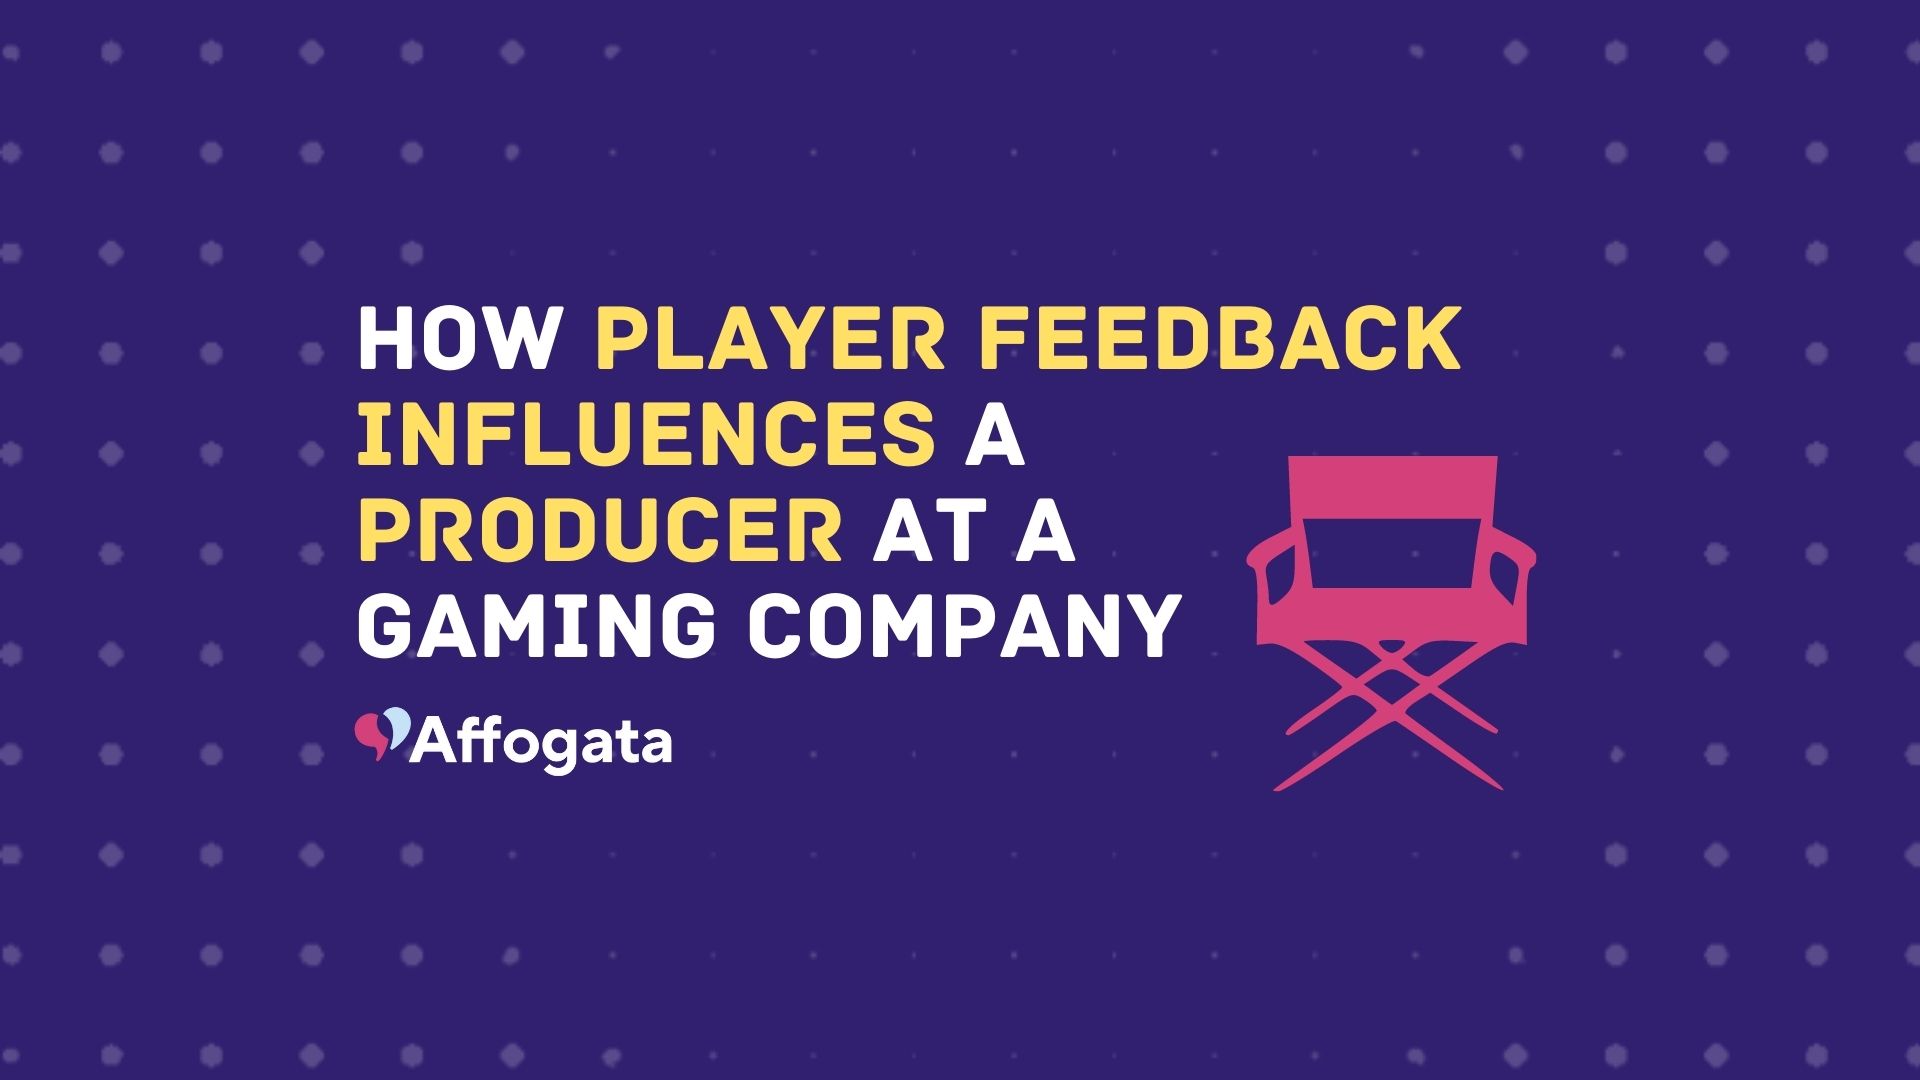 How player feedback influences a producer at a gaming company